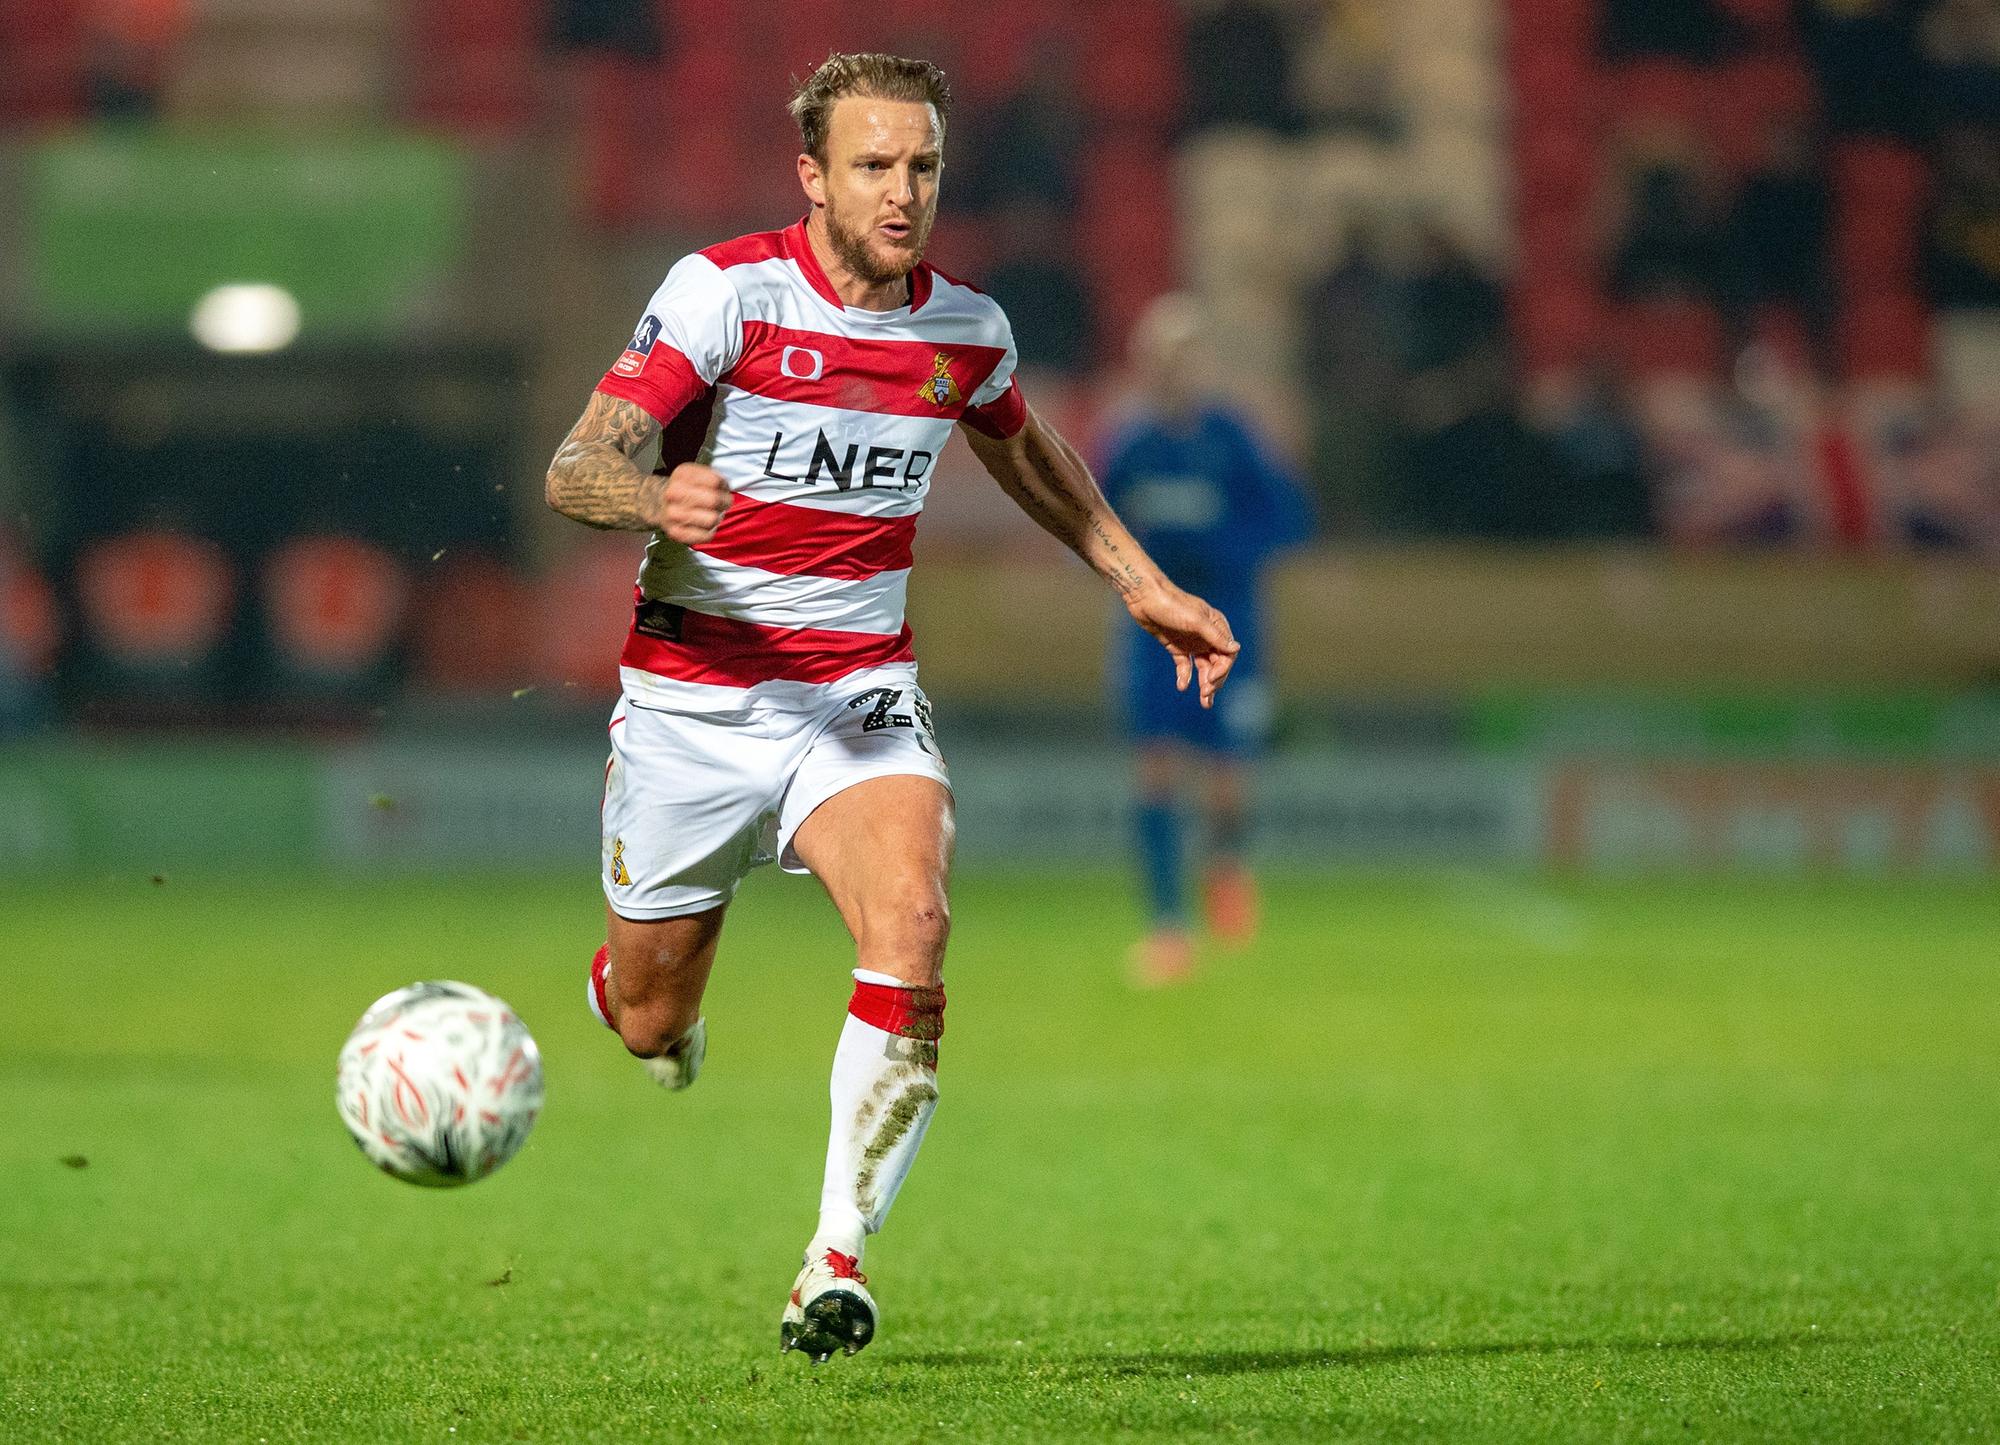 James Coppinger on whether he will play on if he does not get a new deal at...